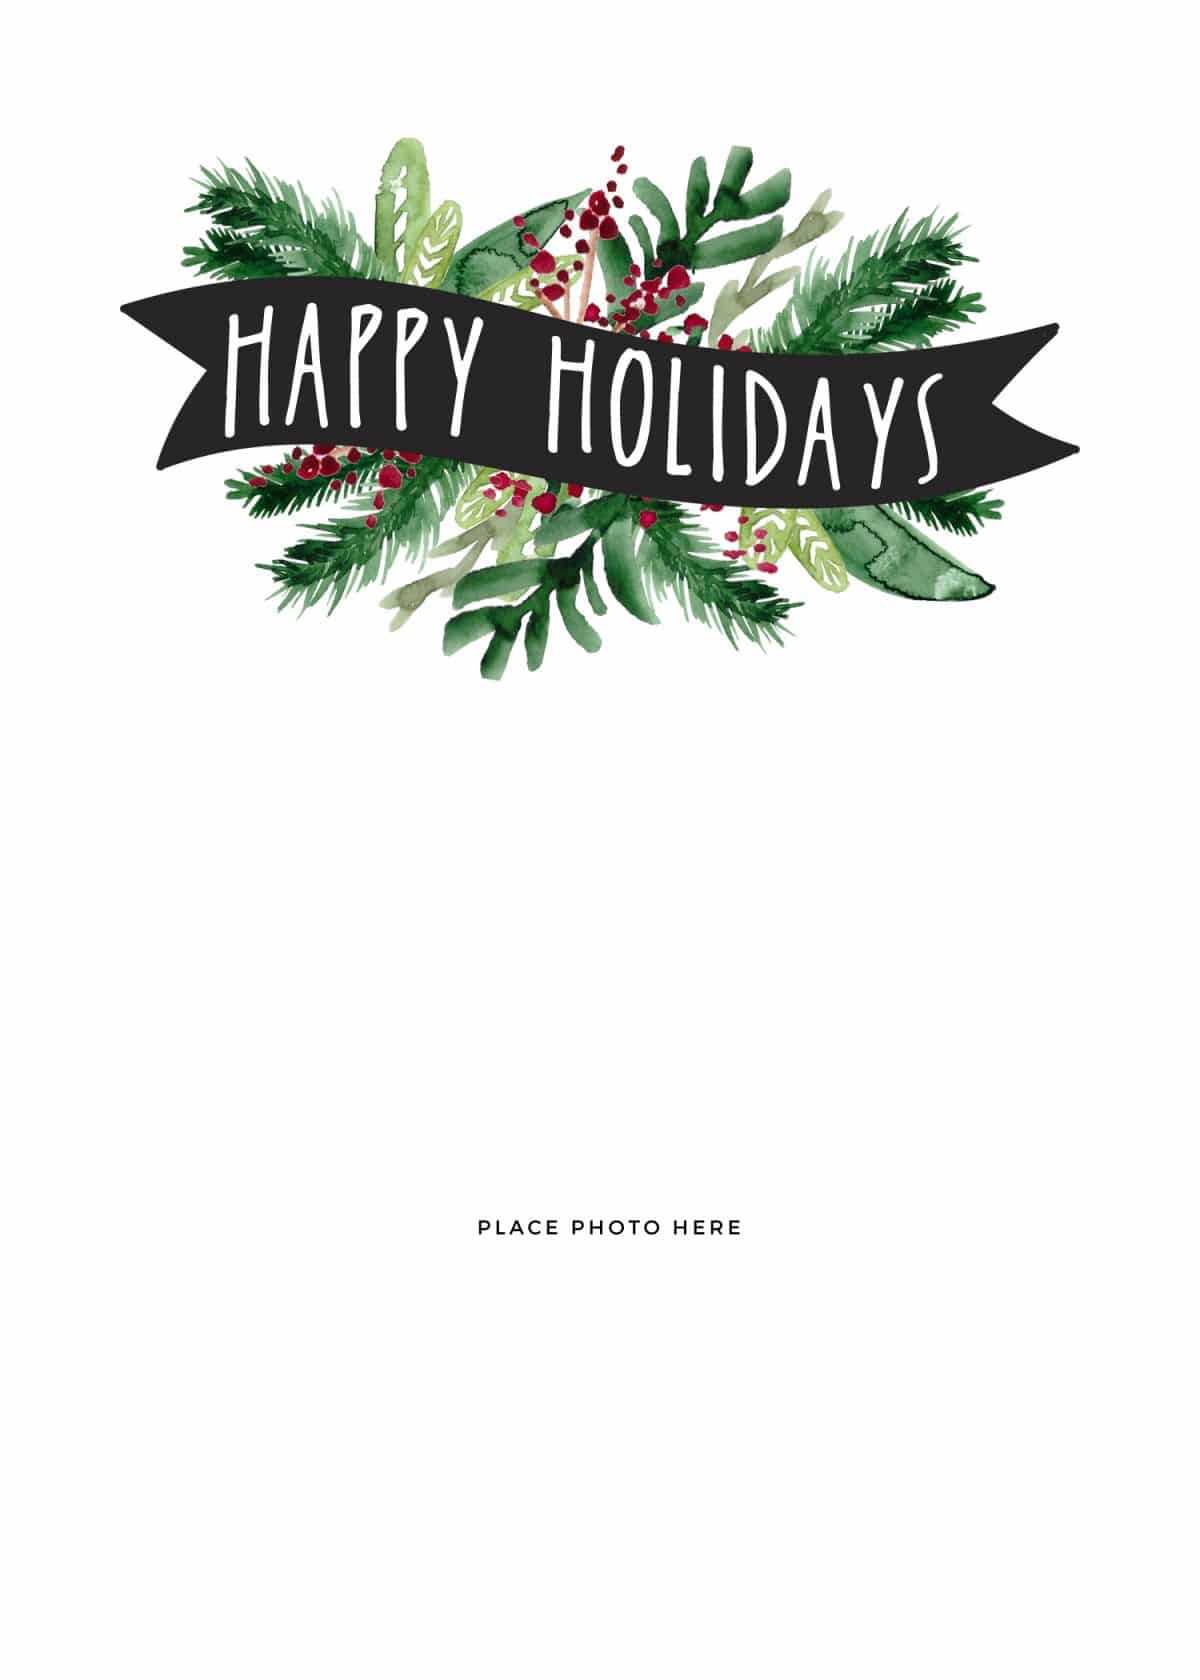 Make Your Own Photo Christmas Cards (For Free!) – Somewhat Throughout Christmas Photo Cards Templates Free Downloads